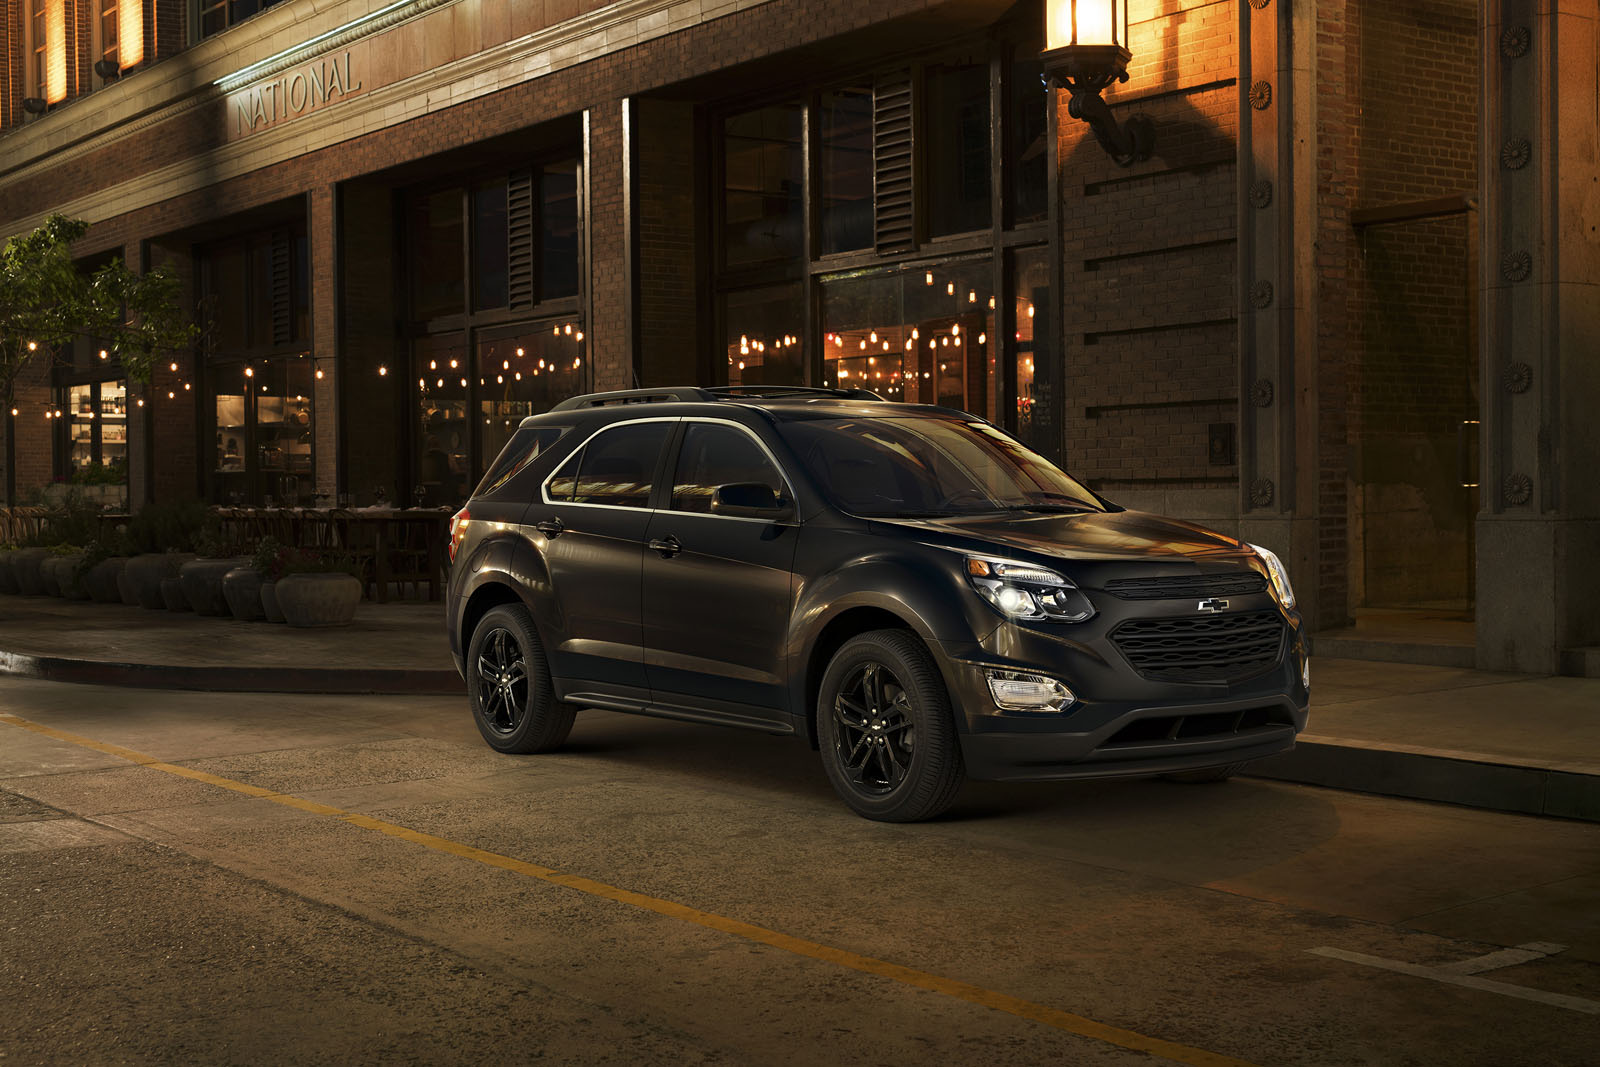 The Equinox Midnight (shown) and Sport Editions and Traverse Graphite Edition join the Trax Midnight Edition and a growing portfolio of Chevrolet special-edition vehicles. Equinox and Traverse combined sales are up double digits in the month of July as crossovers continue to be hot segments.